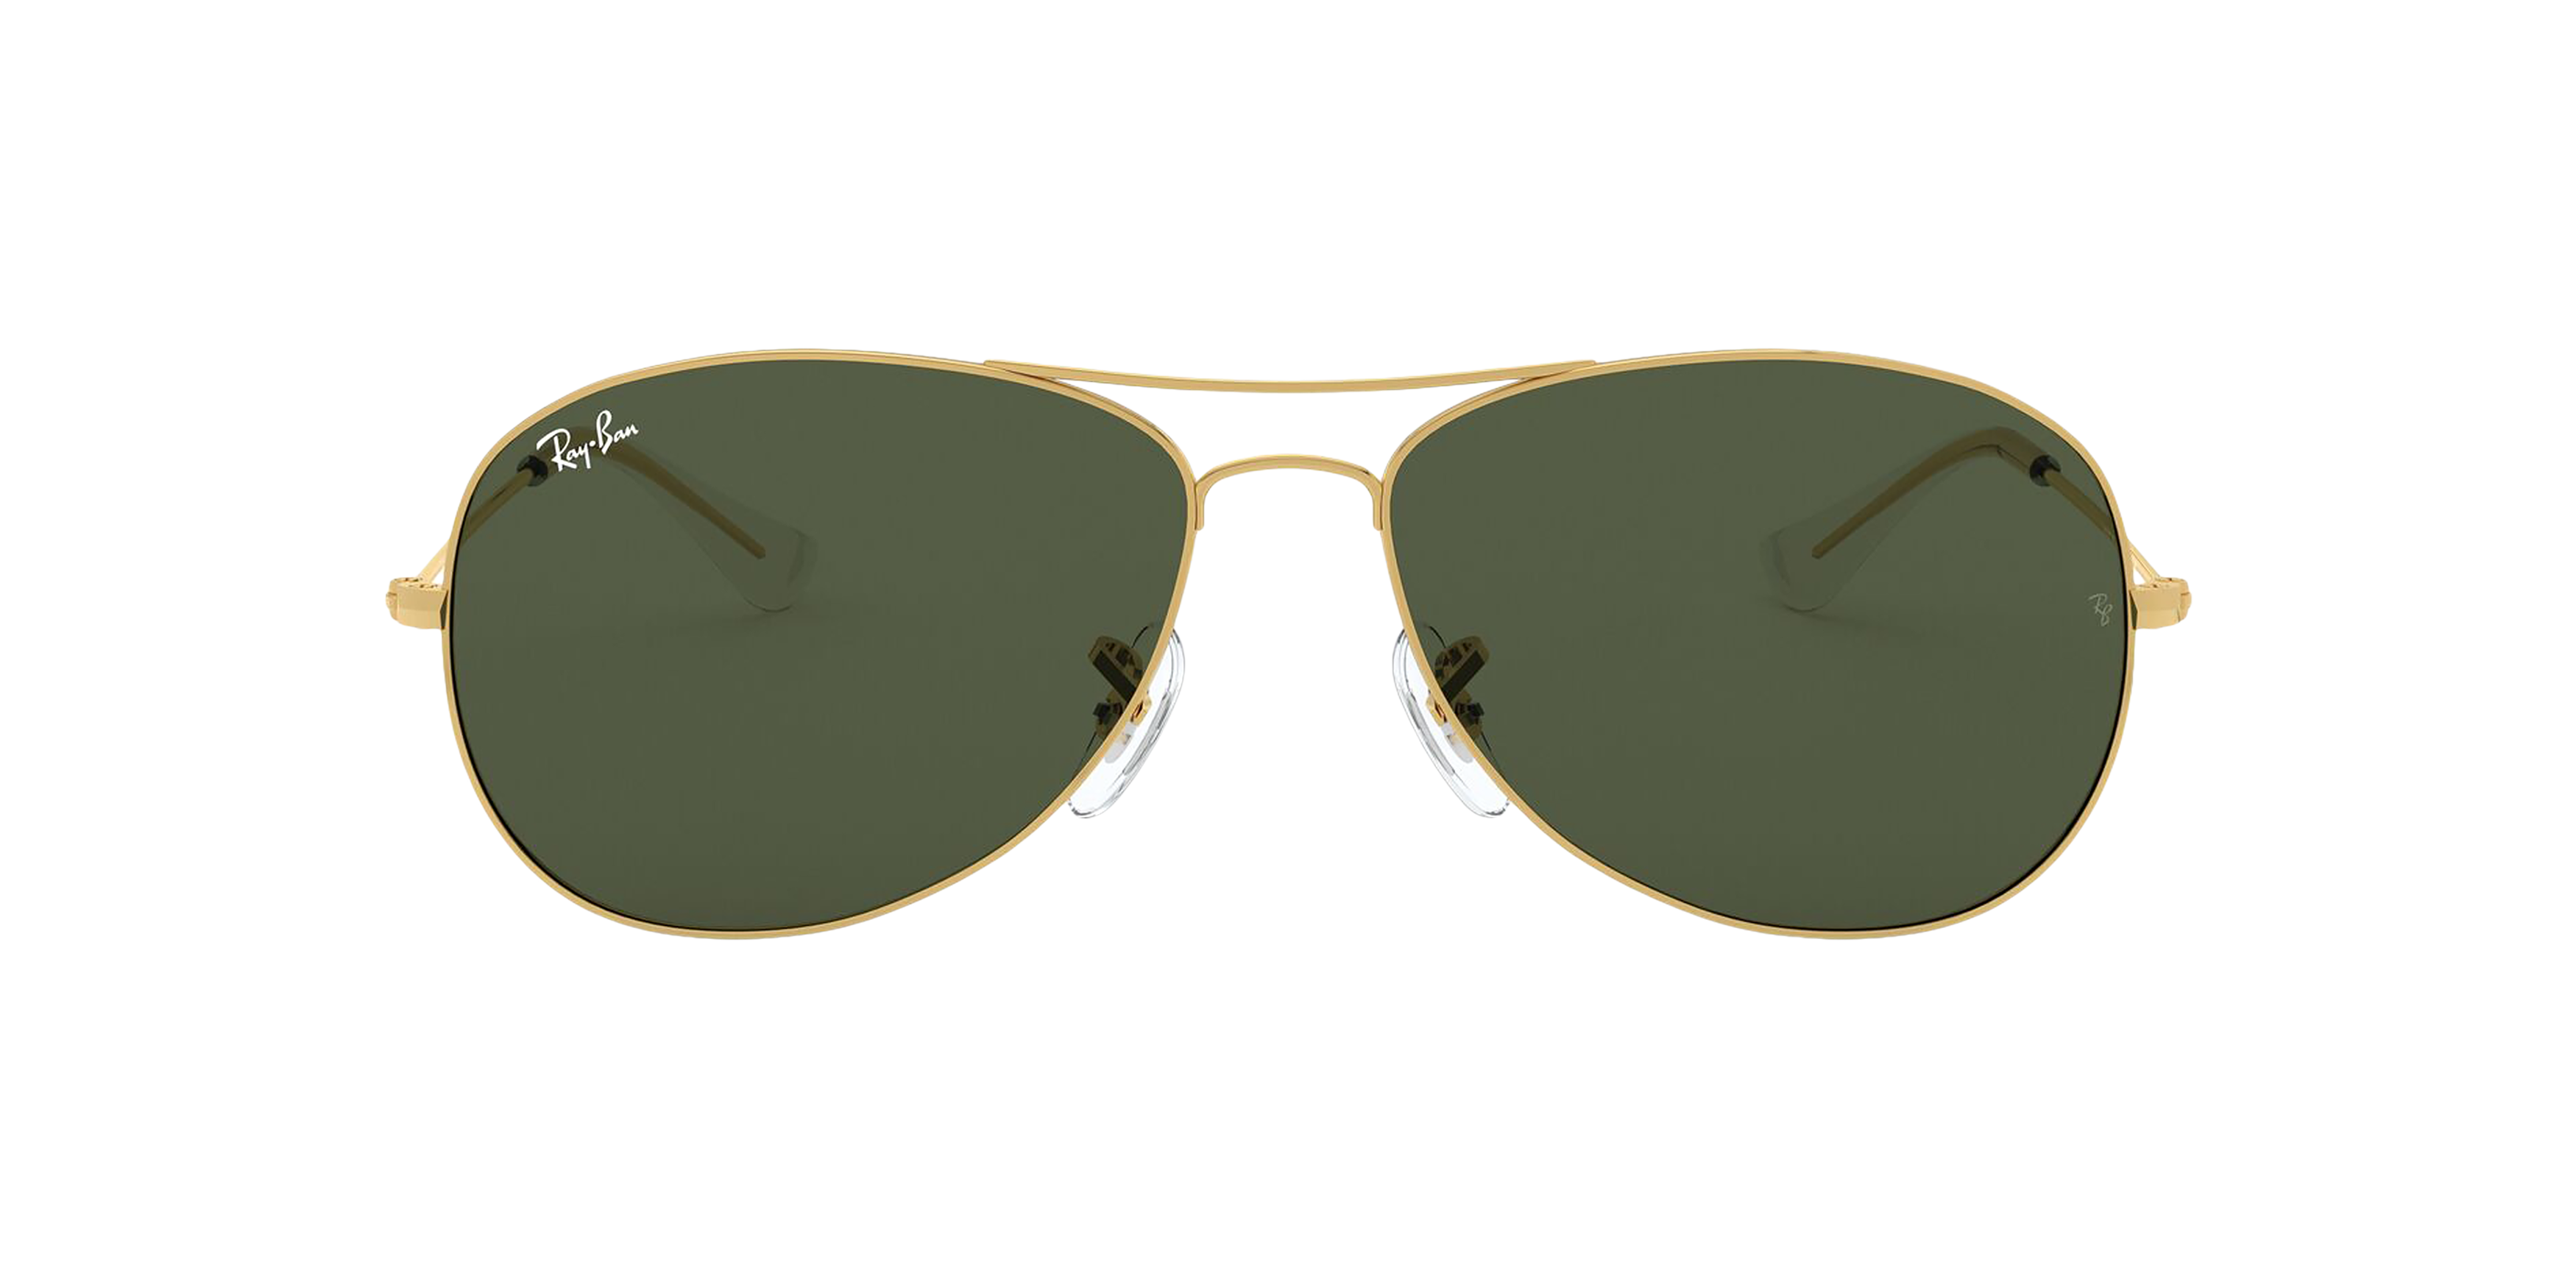 [products.image.front] Ray-Ban Cockpit RB3362 001